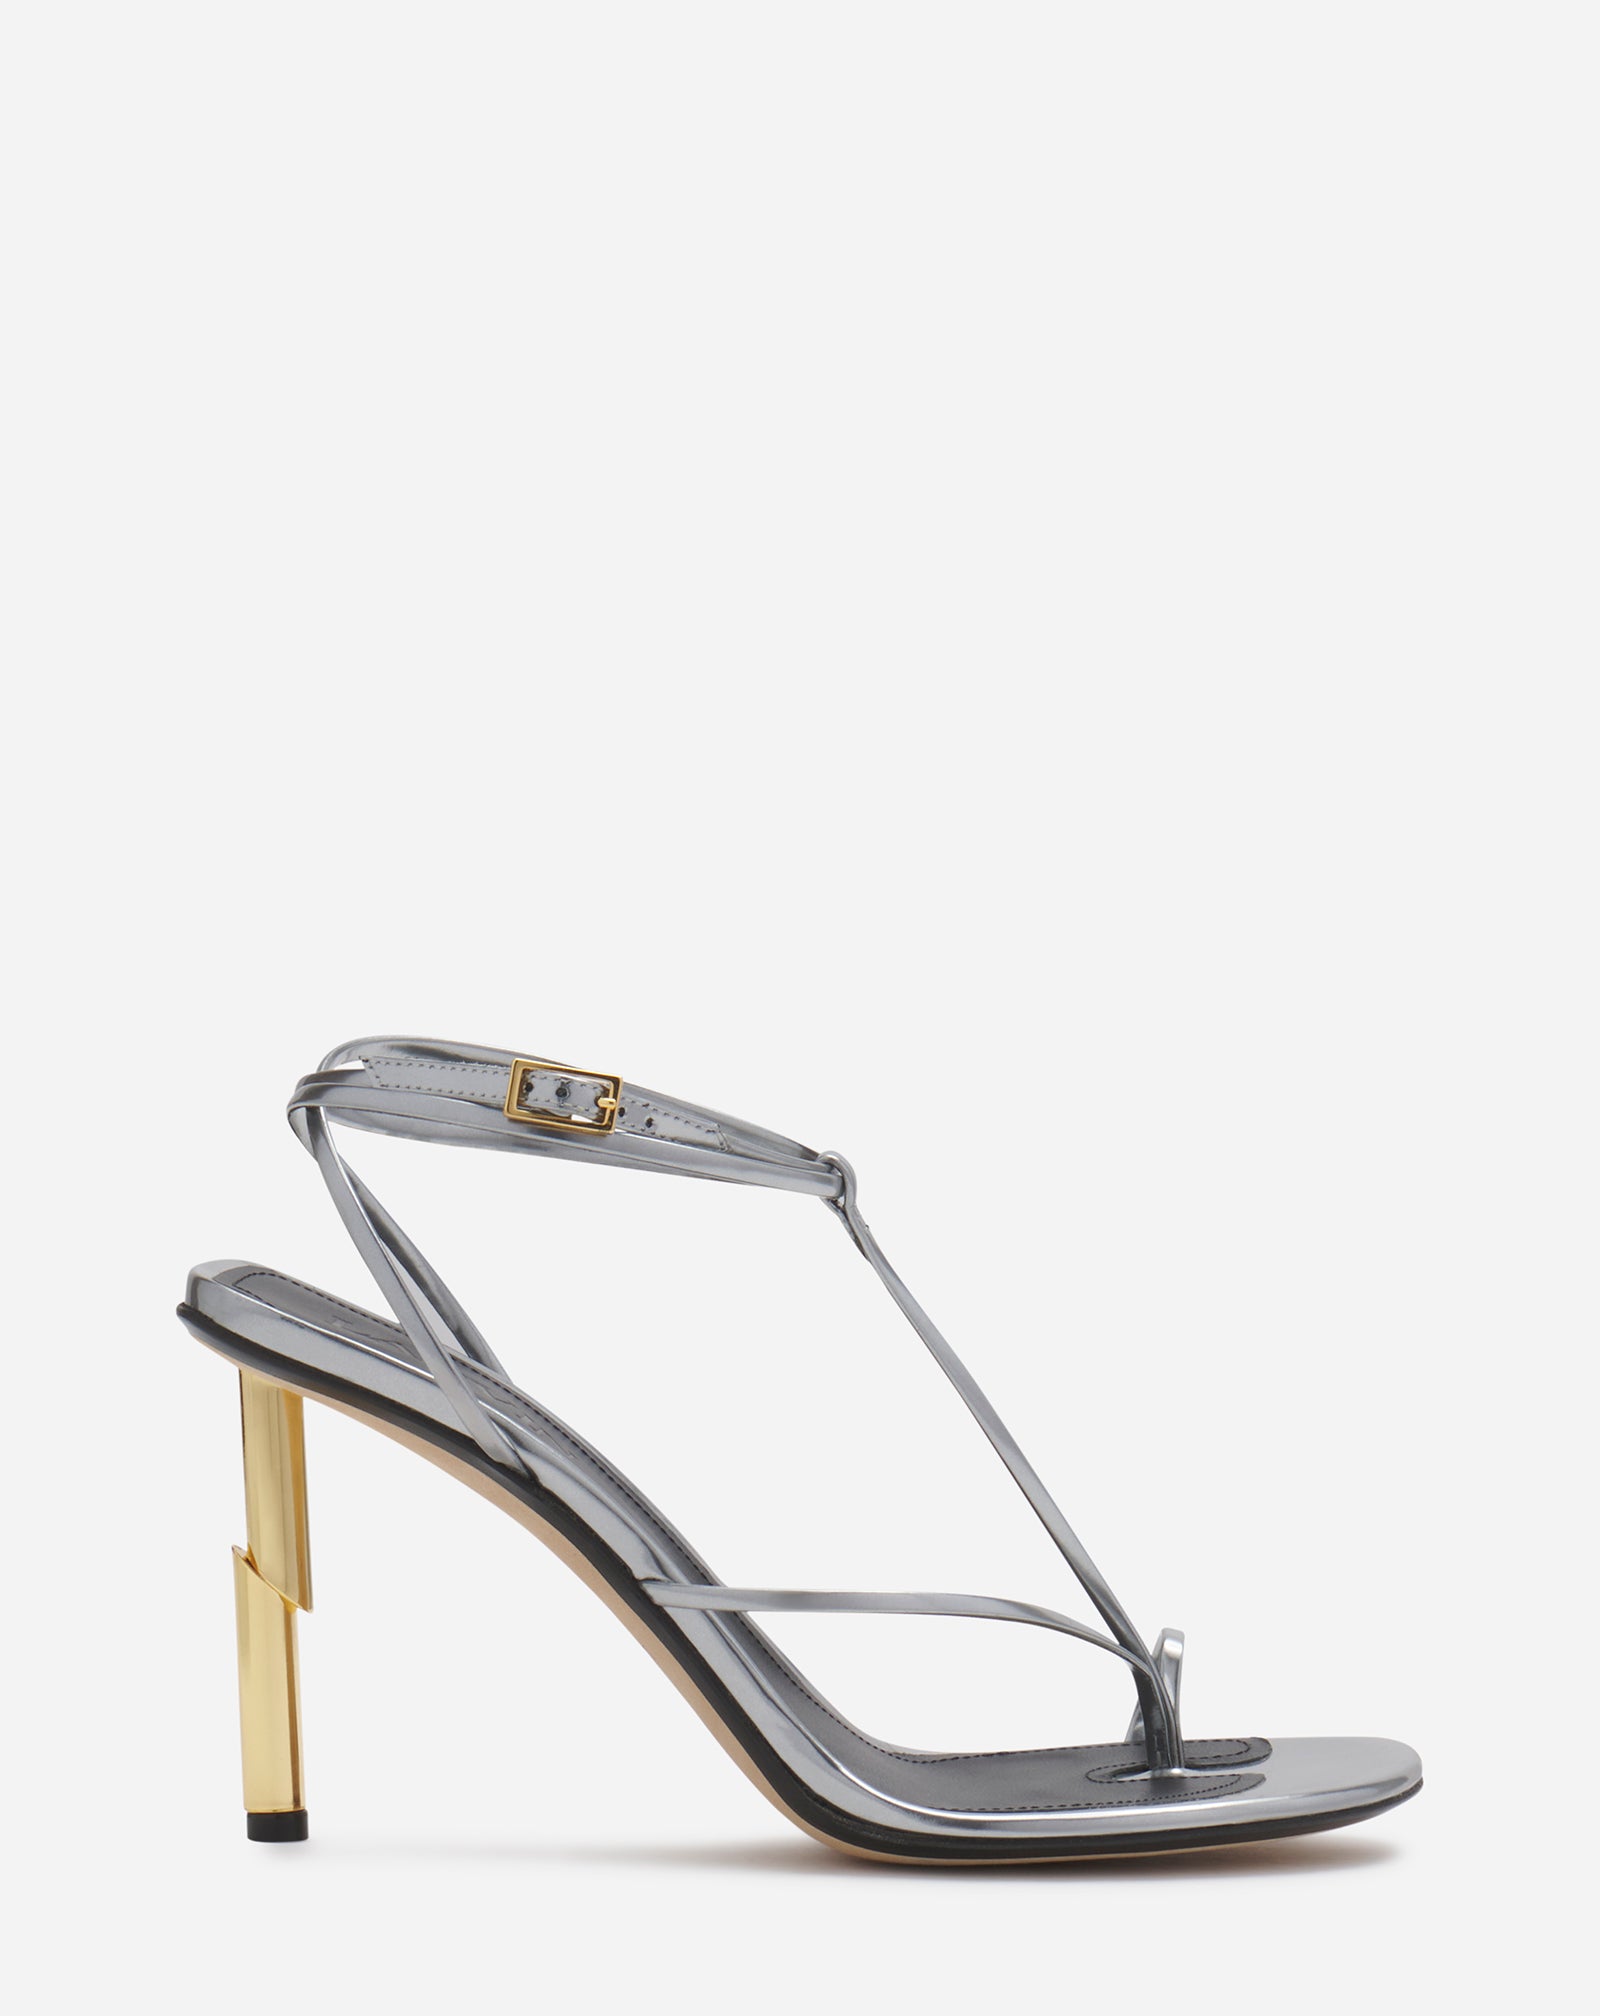 SEQUENCE BY LANVIN SANDALS IN METALLIC LEATHER, SILVER